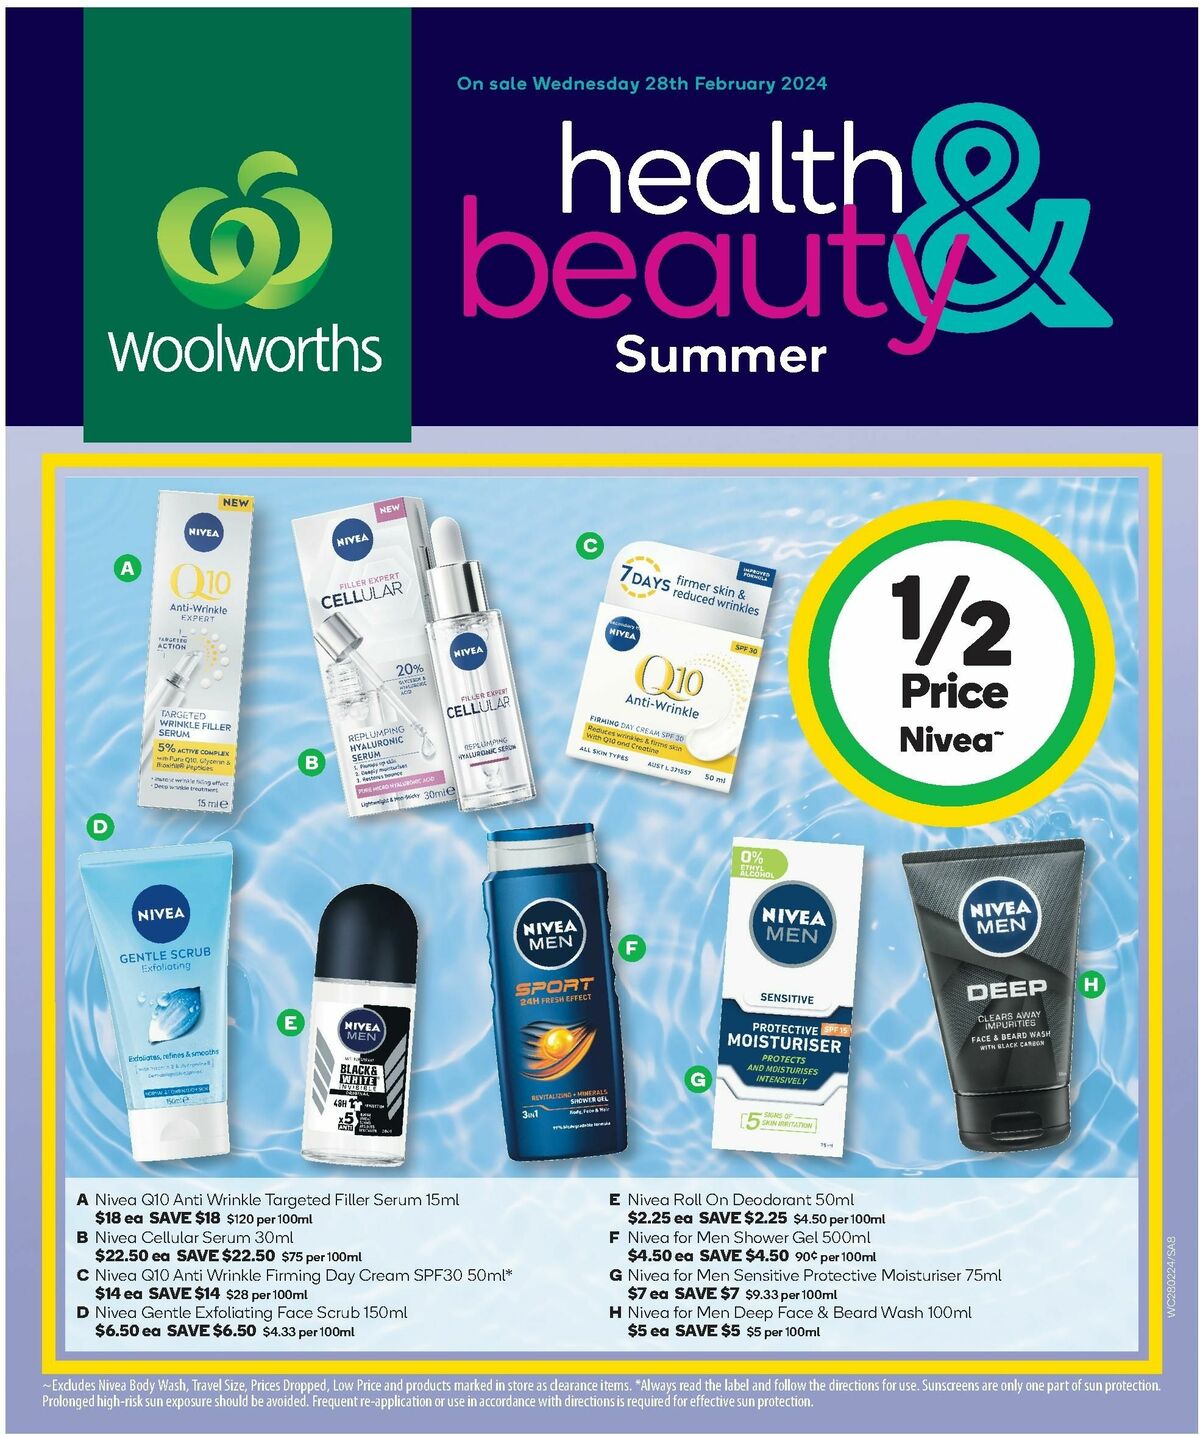 Woolworths Summer Health & Beauty Catalogues from 28 February